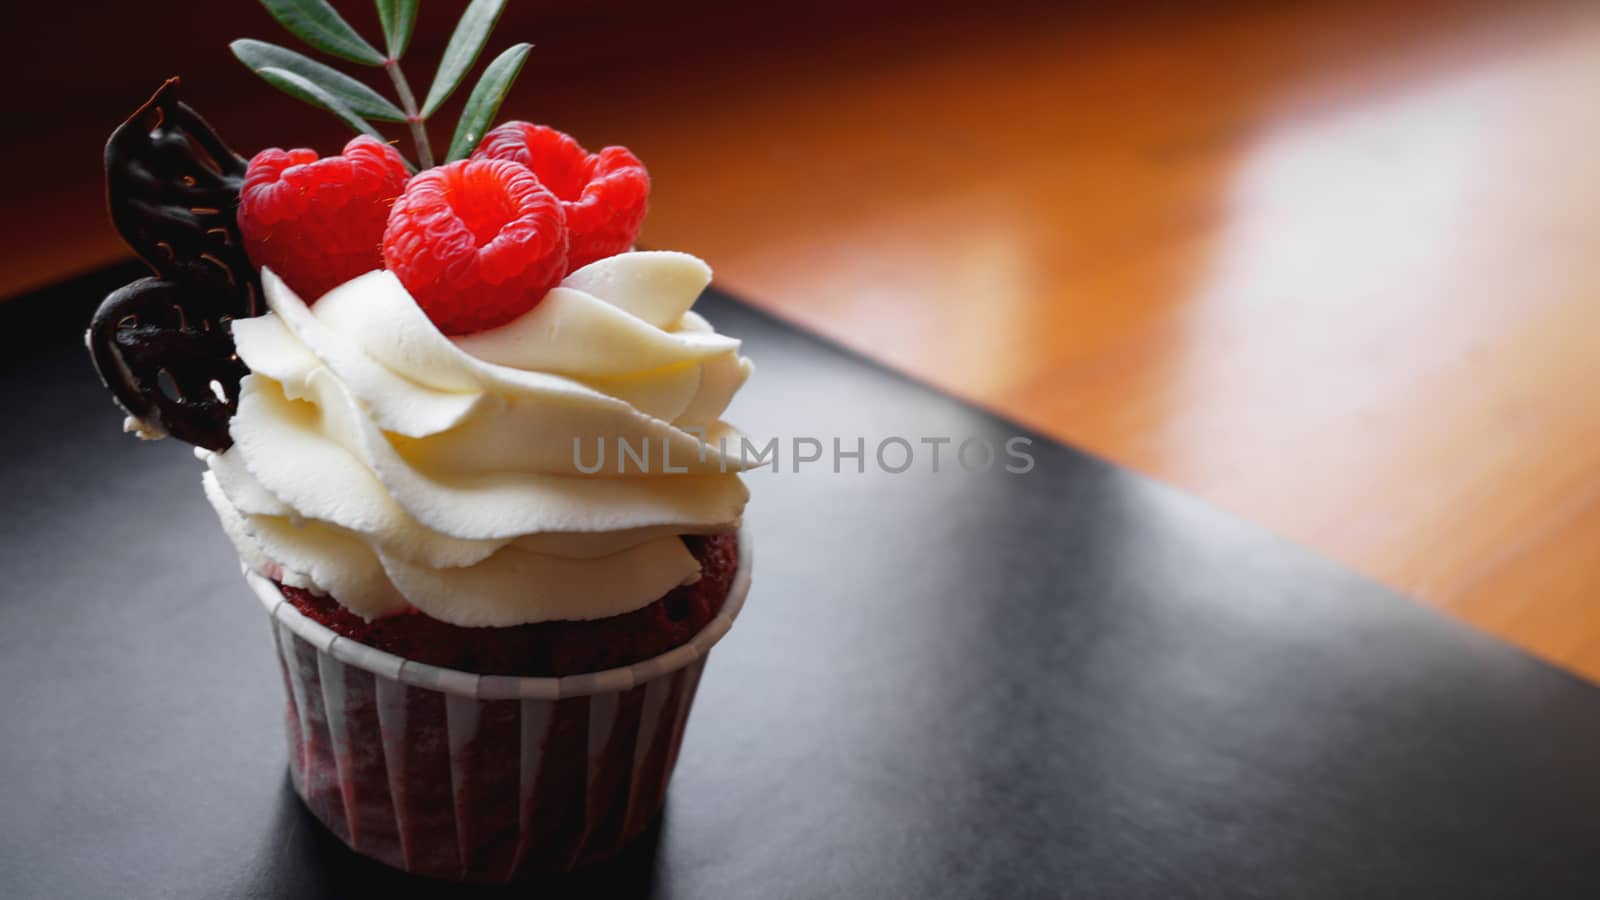 Delicious raspberry cupcakes on dark background by natali_brill